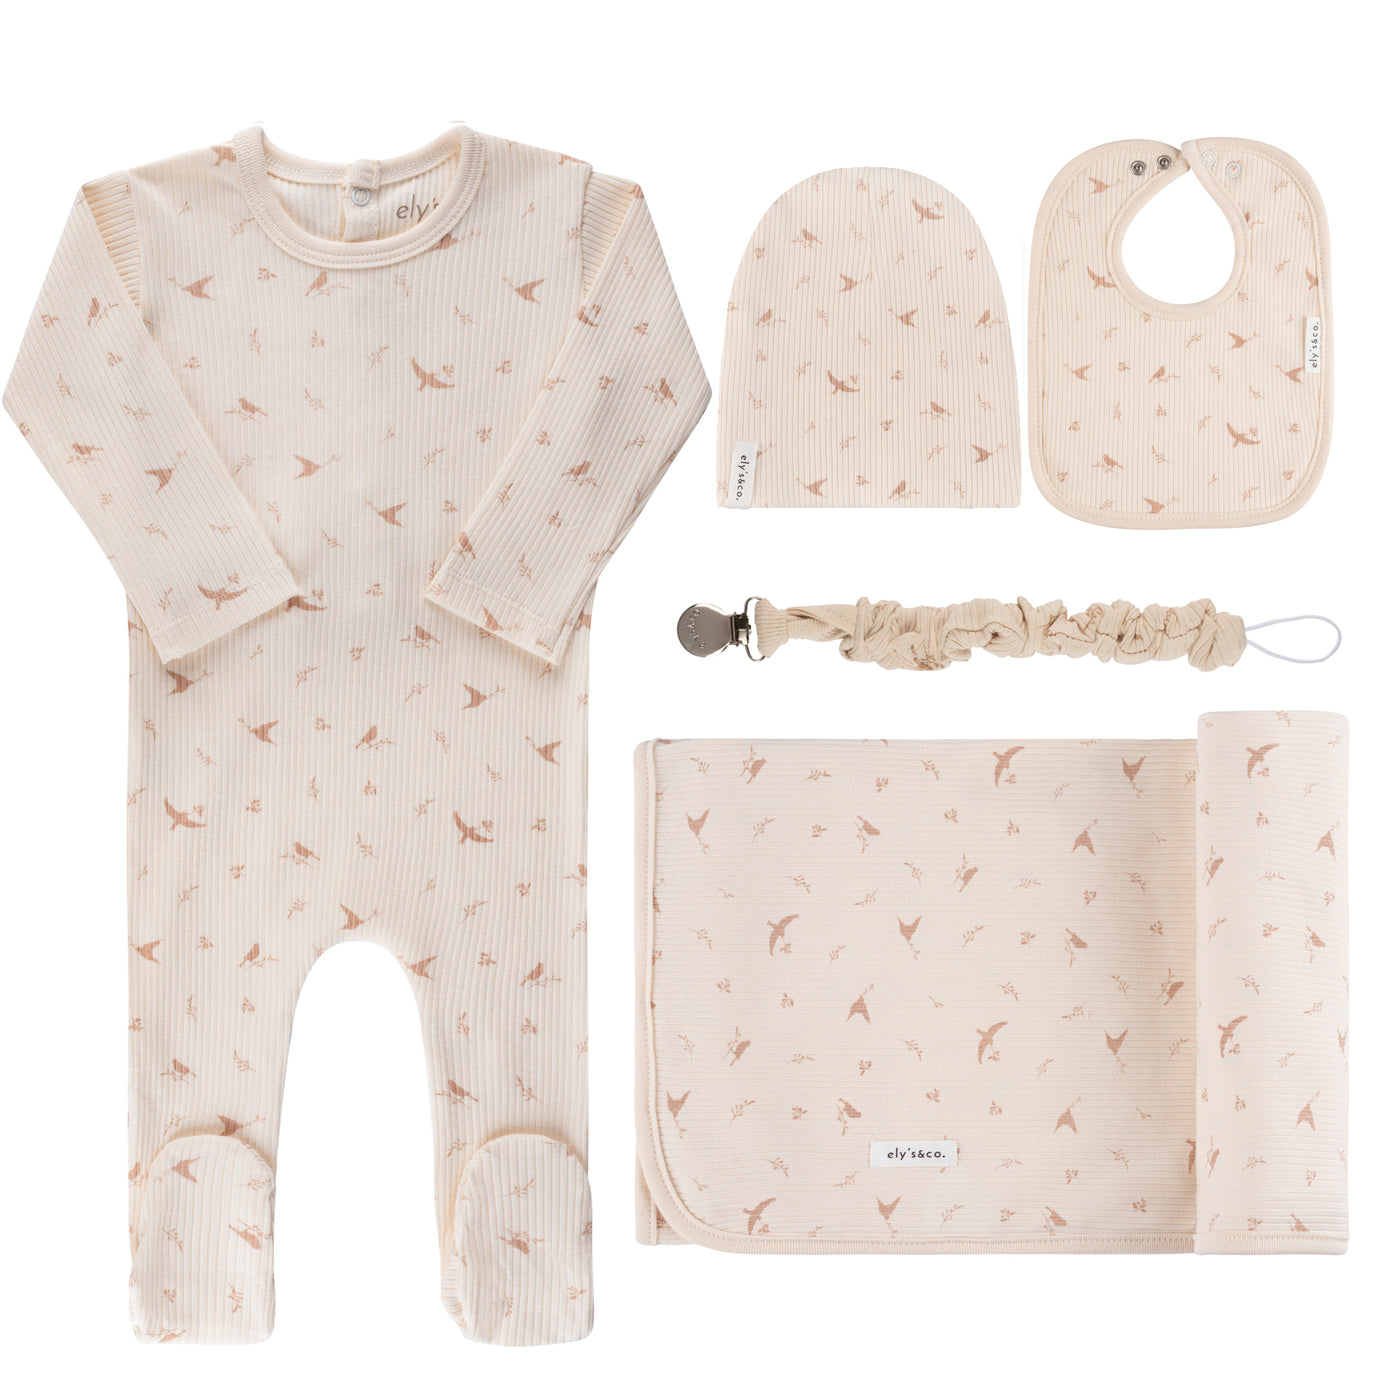 Ely's & Co. Birds Ribbed Cotton Cream/Pink Five Piece Set